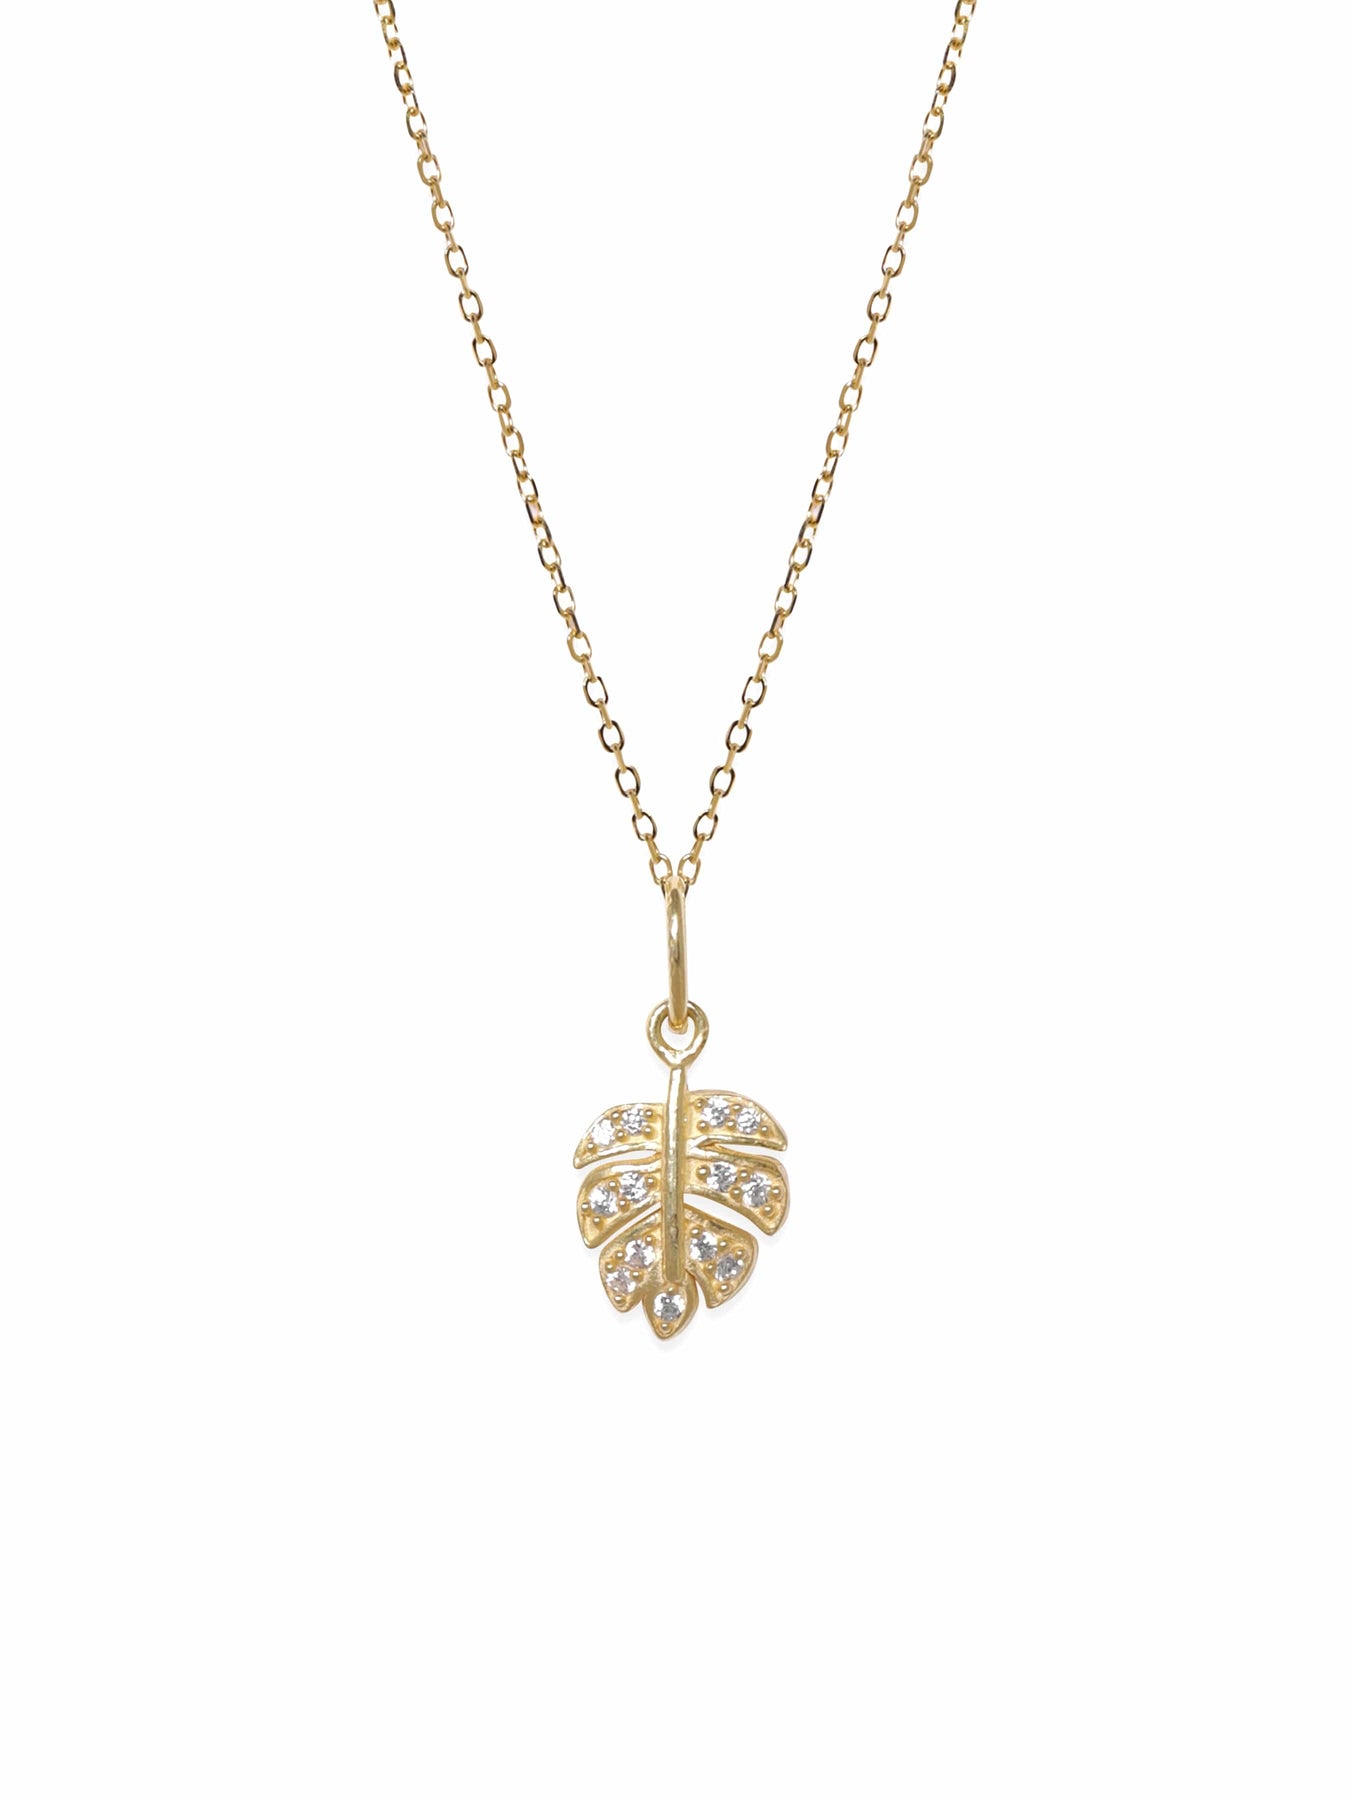 Aluinn Leaf Necklace Gold Dainty Olive Pendant Necklace Simple Necklace  Chain Jewelry for Women and Teen Girls : Amazon.in: Jewellery